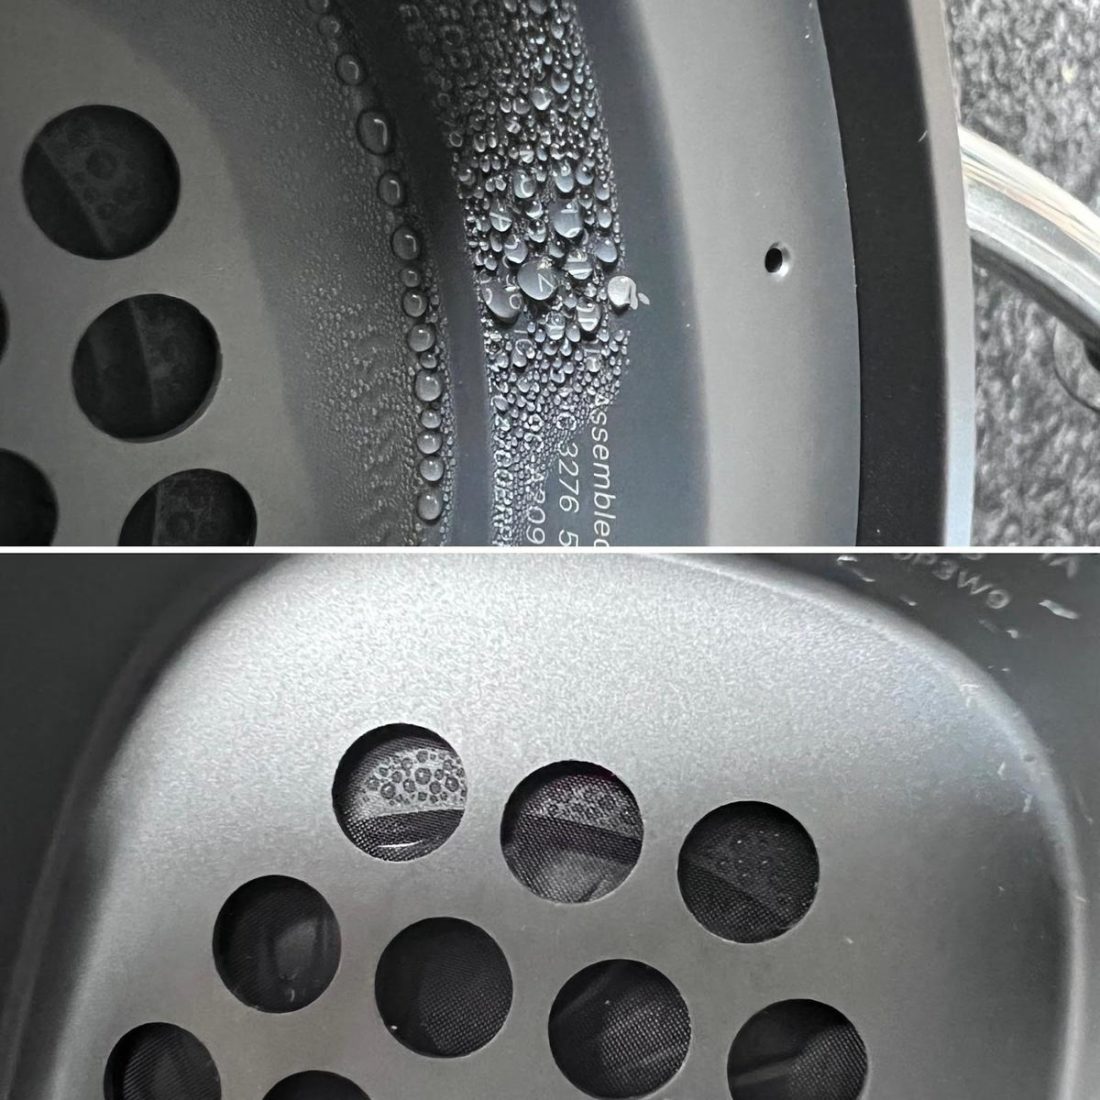 Airpods Max condensation after 7 hours of continuous wear in the UK (From: Reddit/lowellmco) reddit.com/r/Airpodsmax/comments/ugp90t/condensation_generation_7_hours_constant_wear_13c/